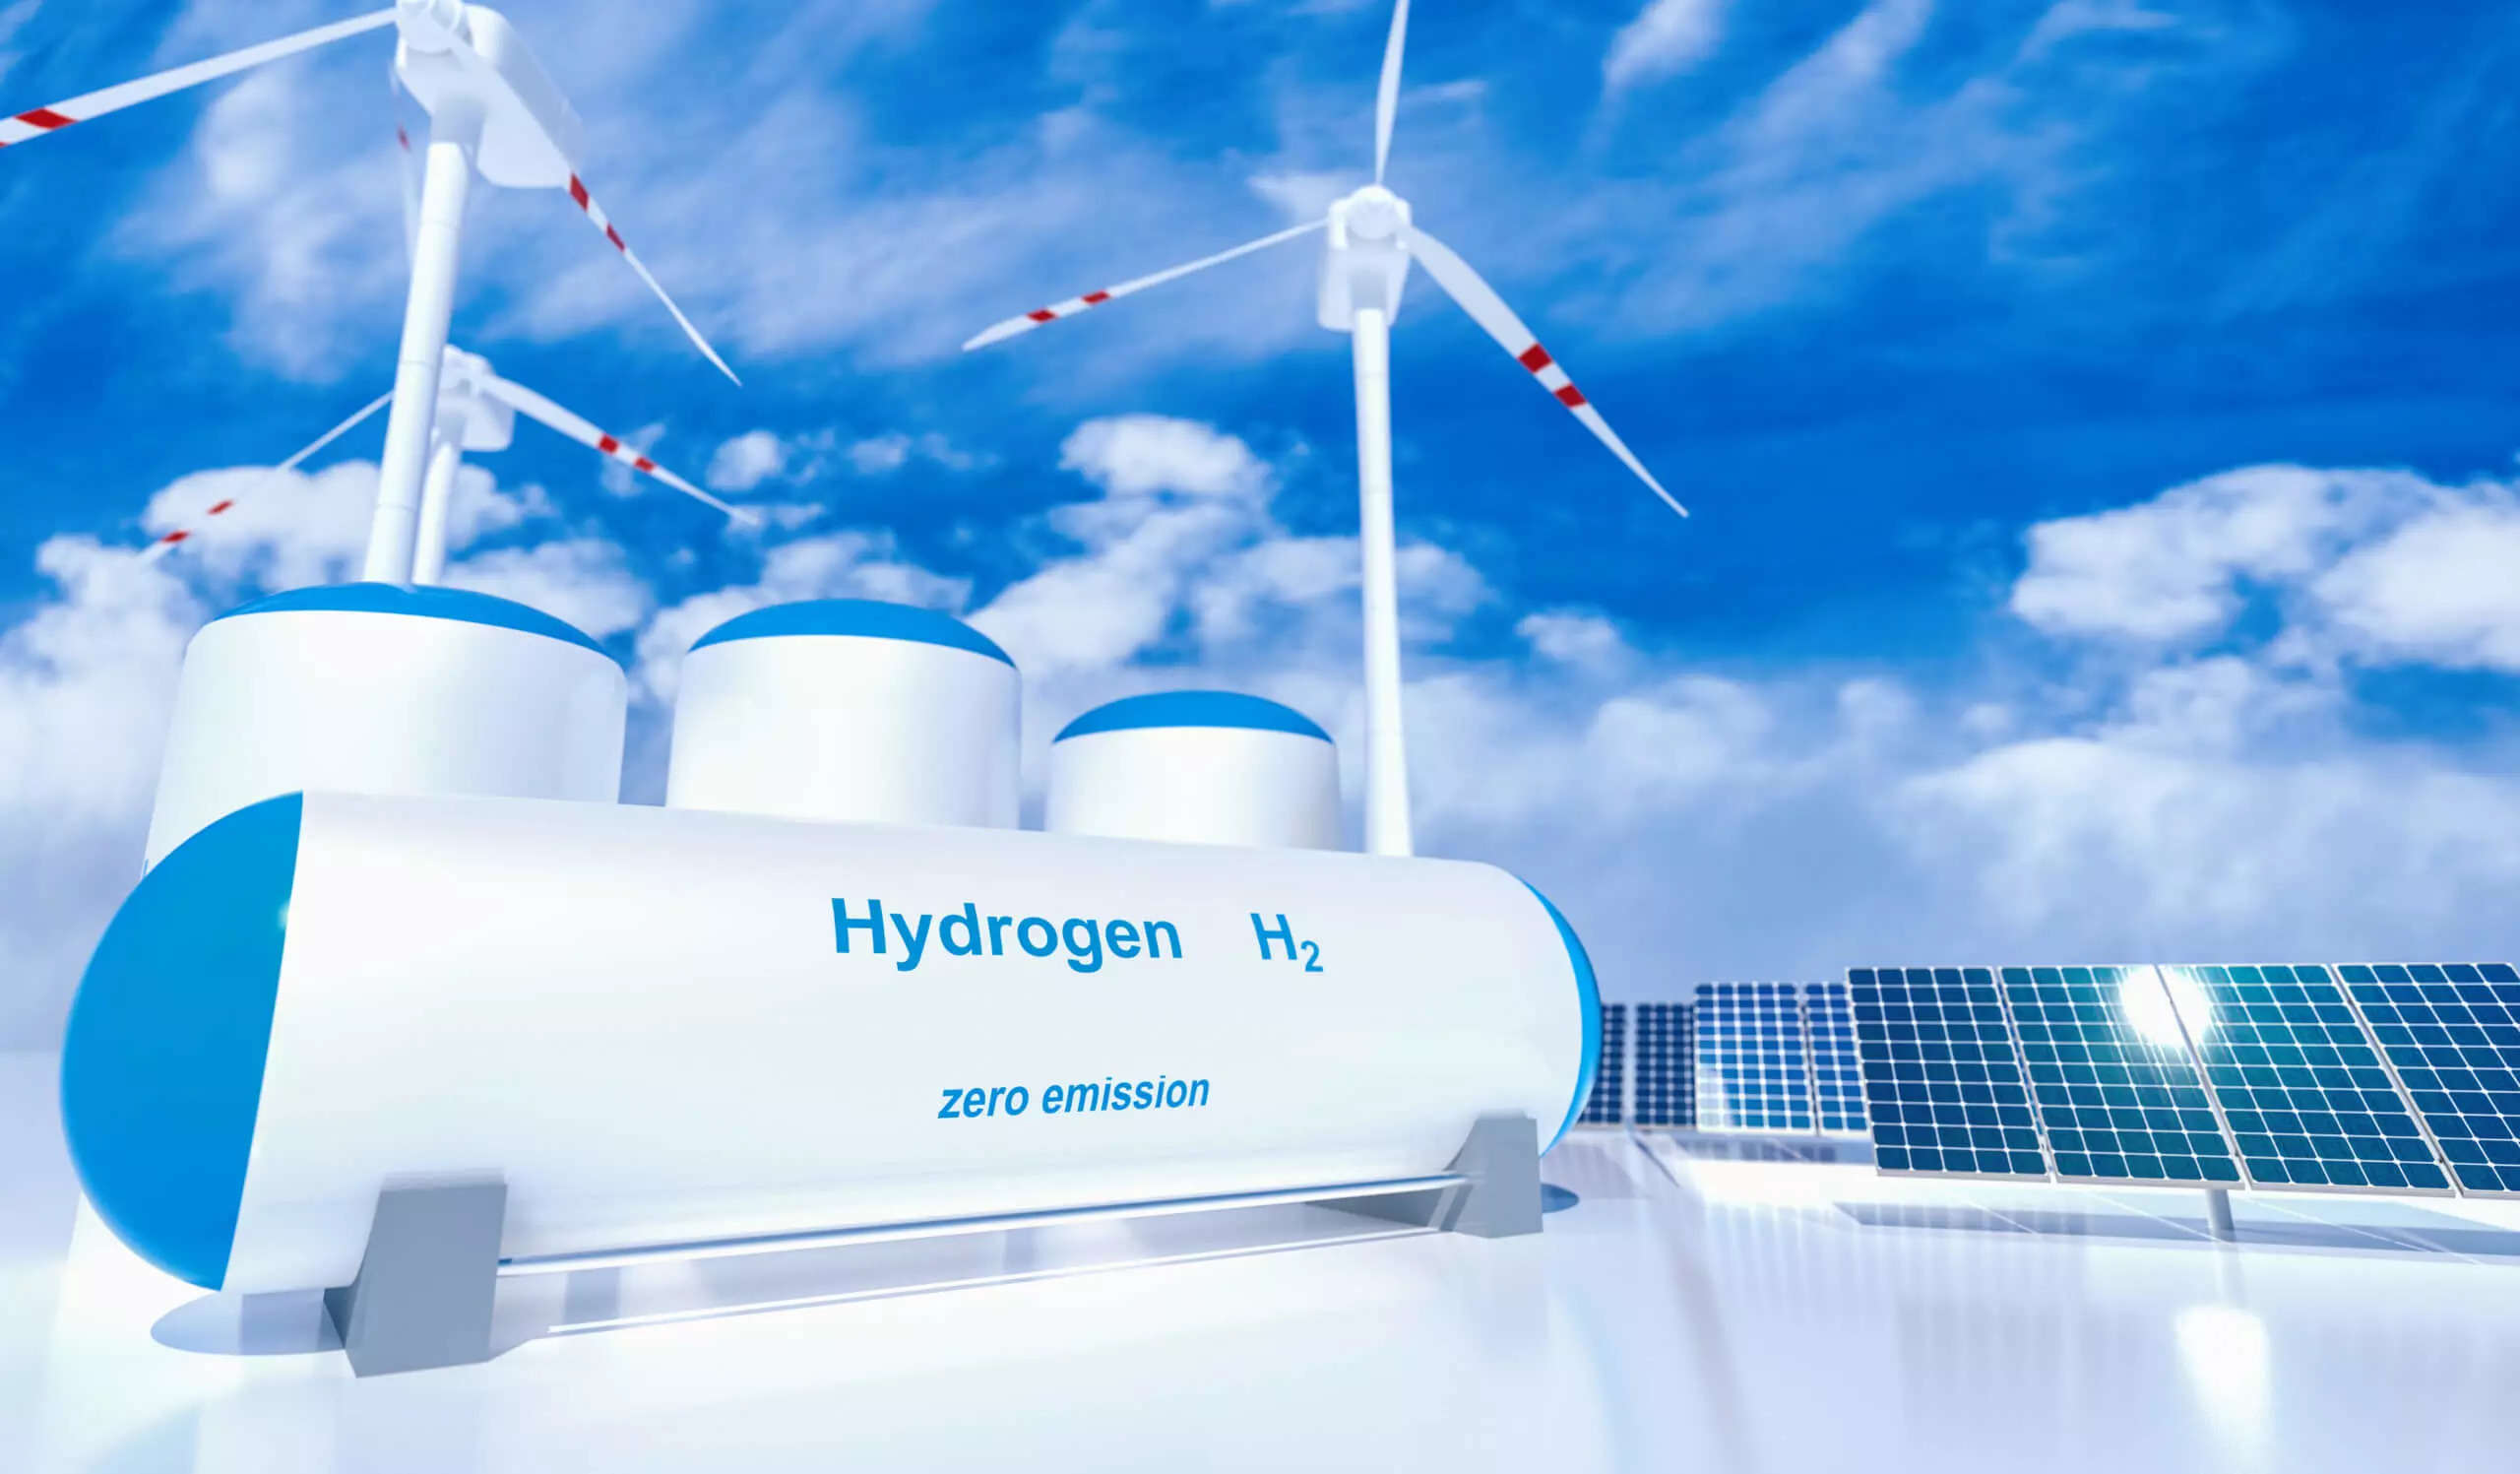 India and Japan to hold joint seminars on attracting Hydrogen investments